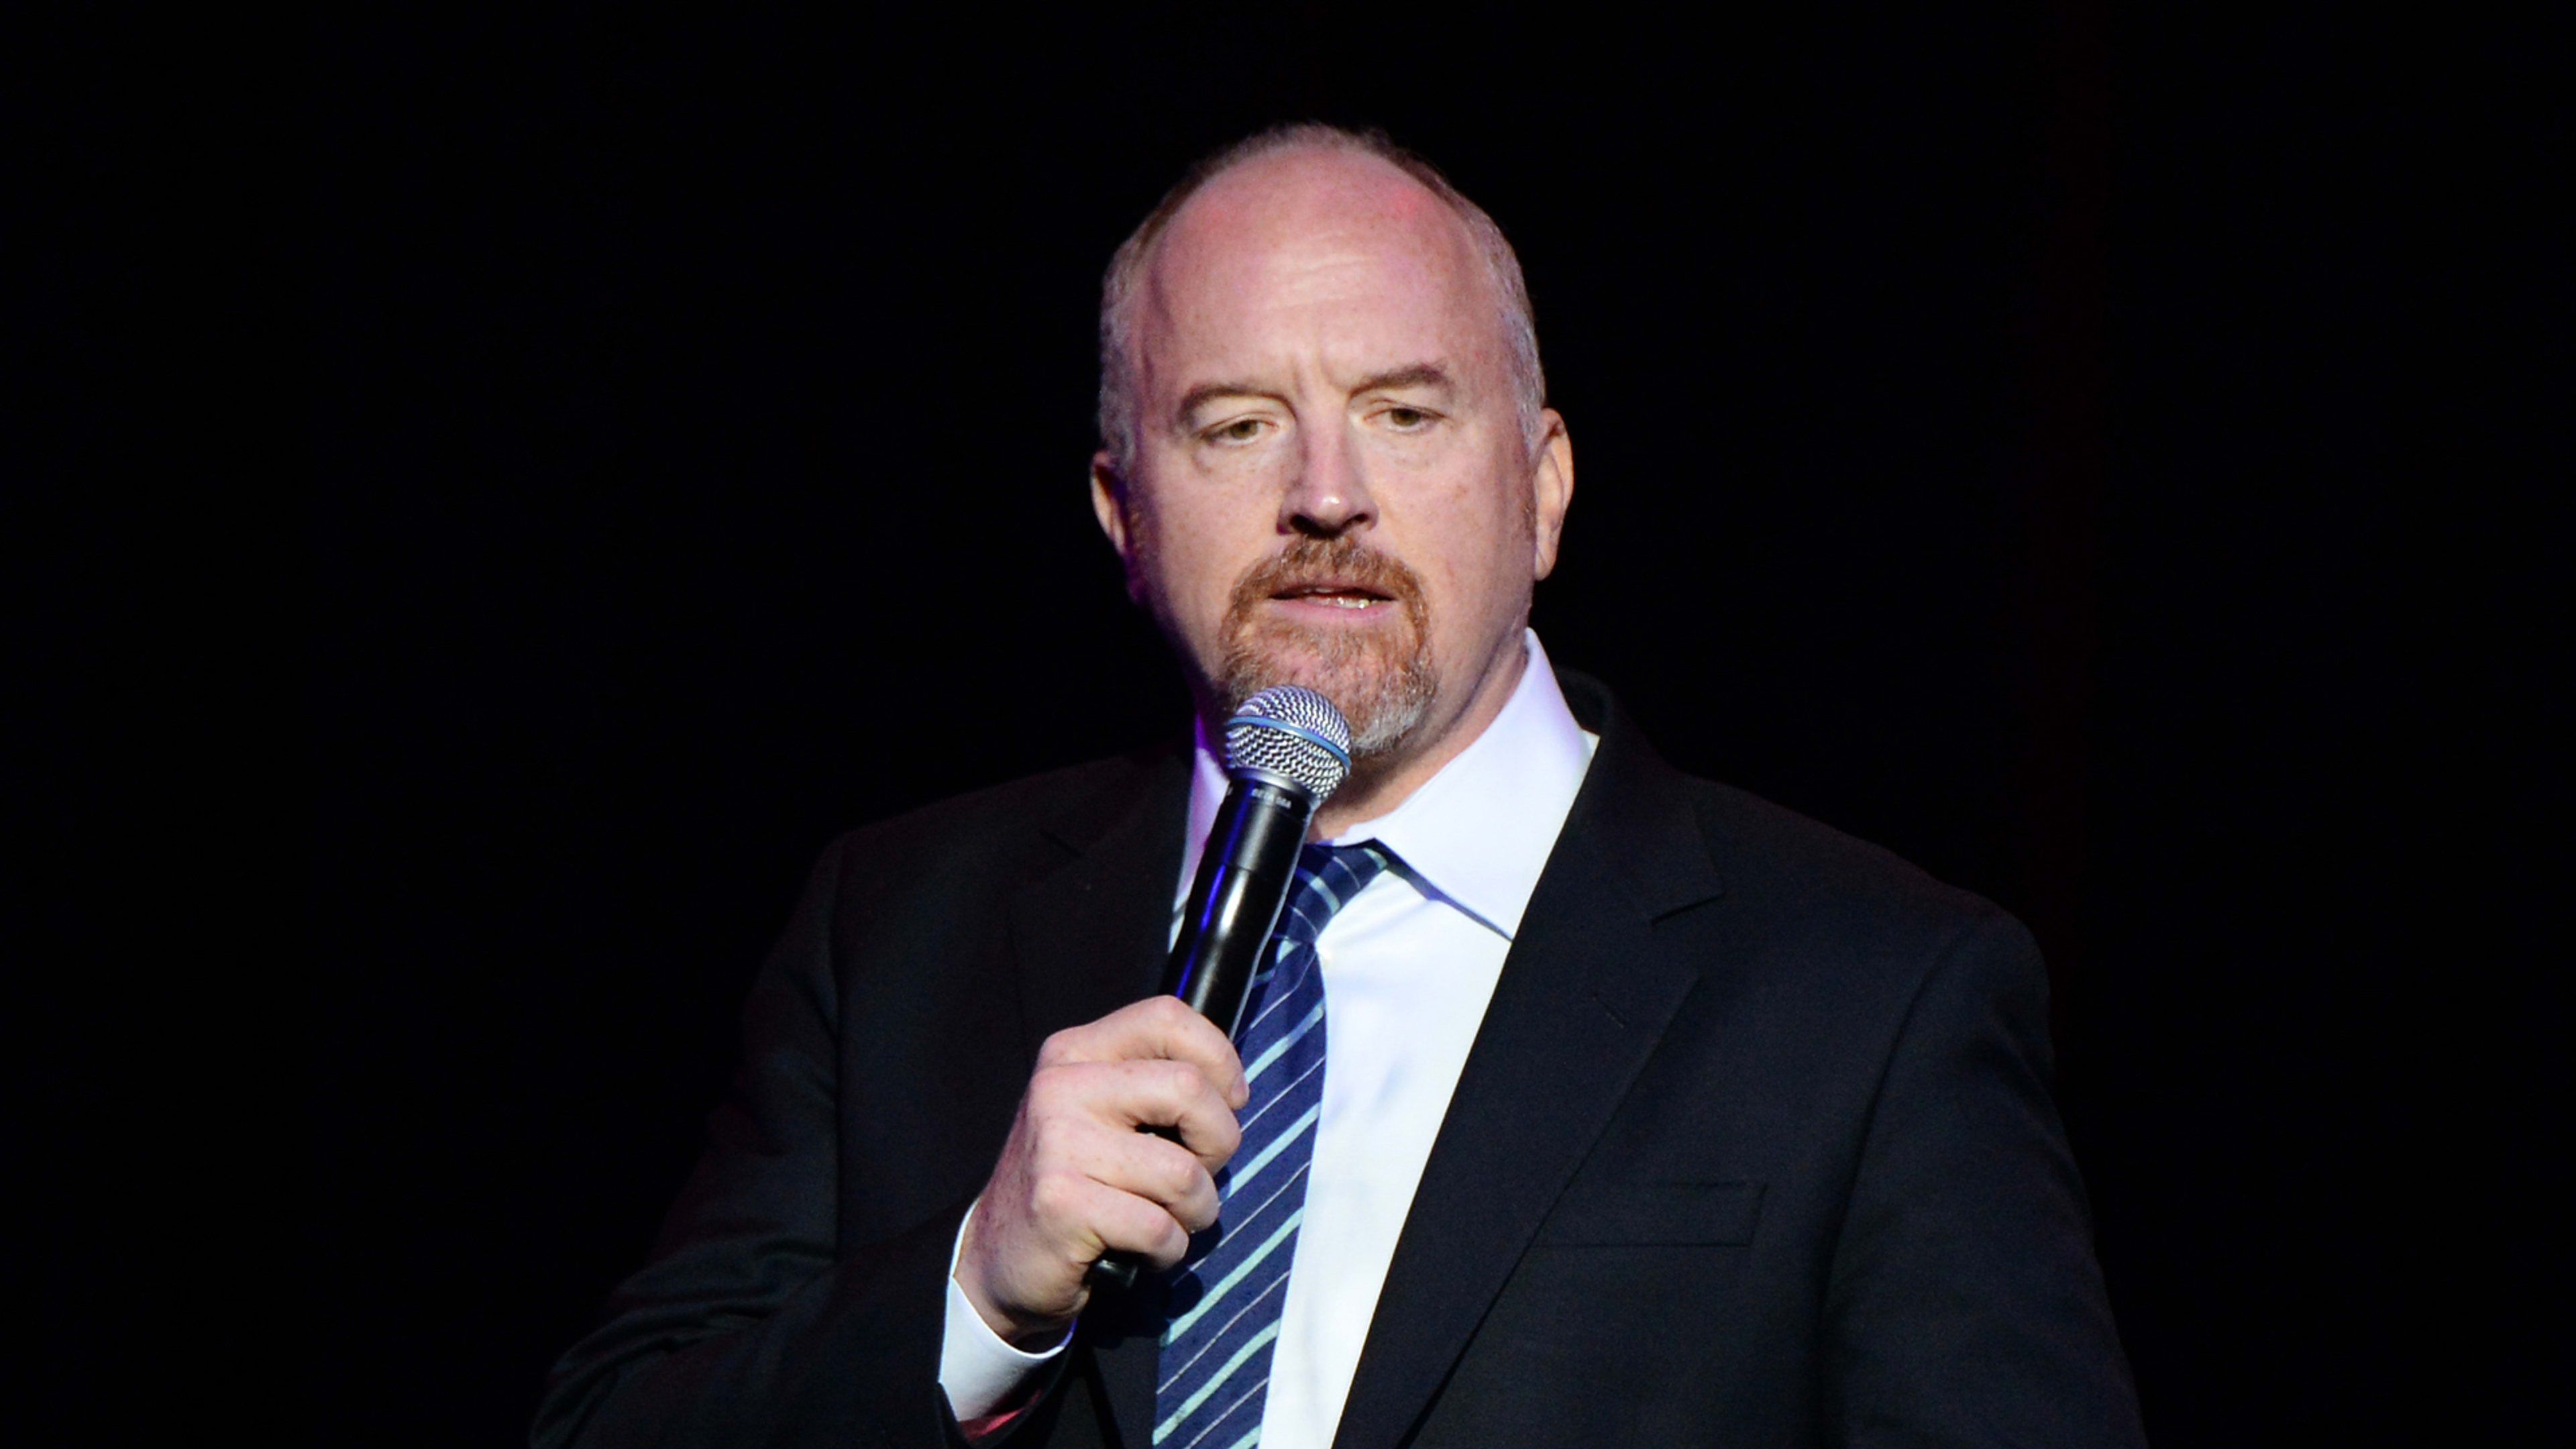 Louis CK’s new movie has just been cancelled